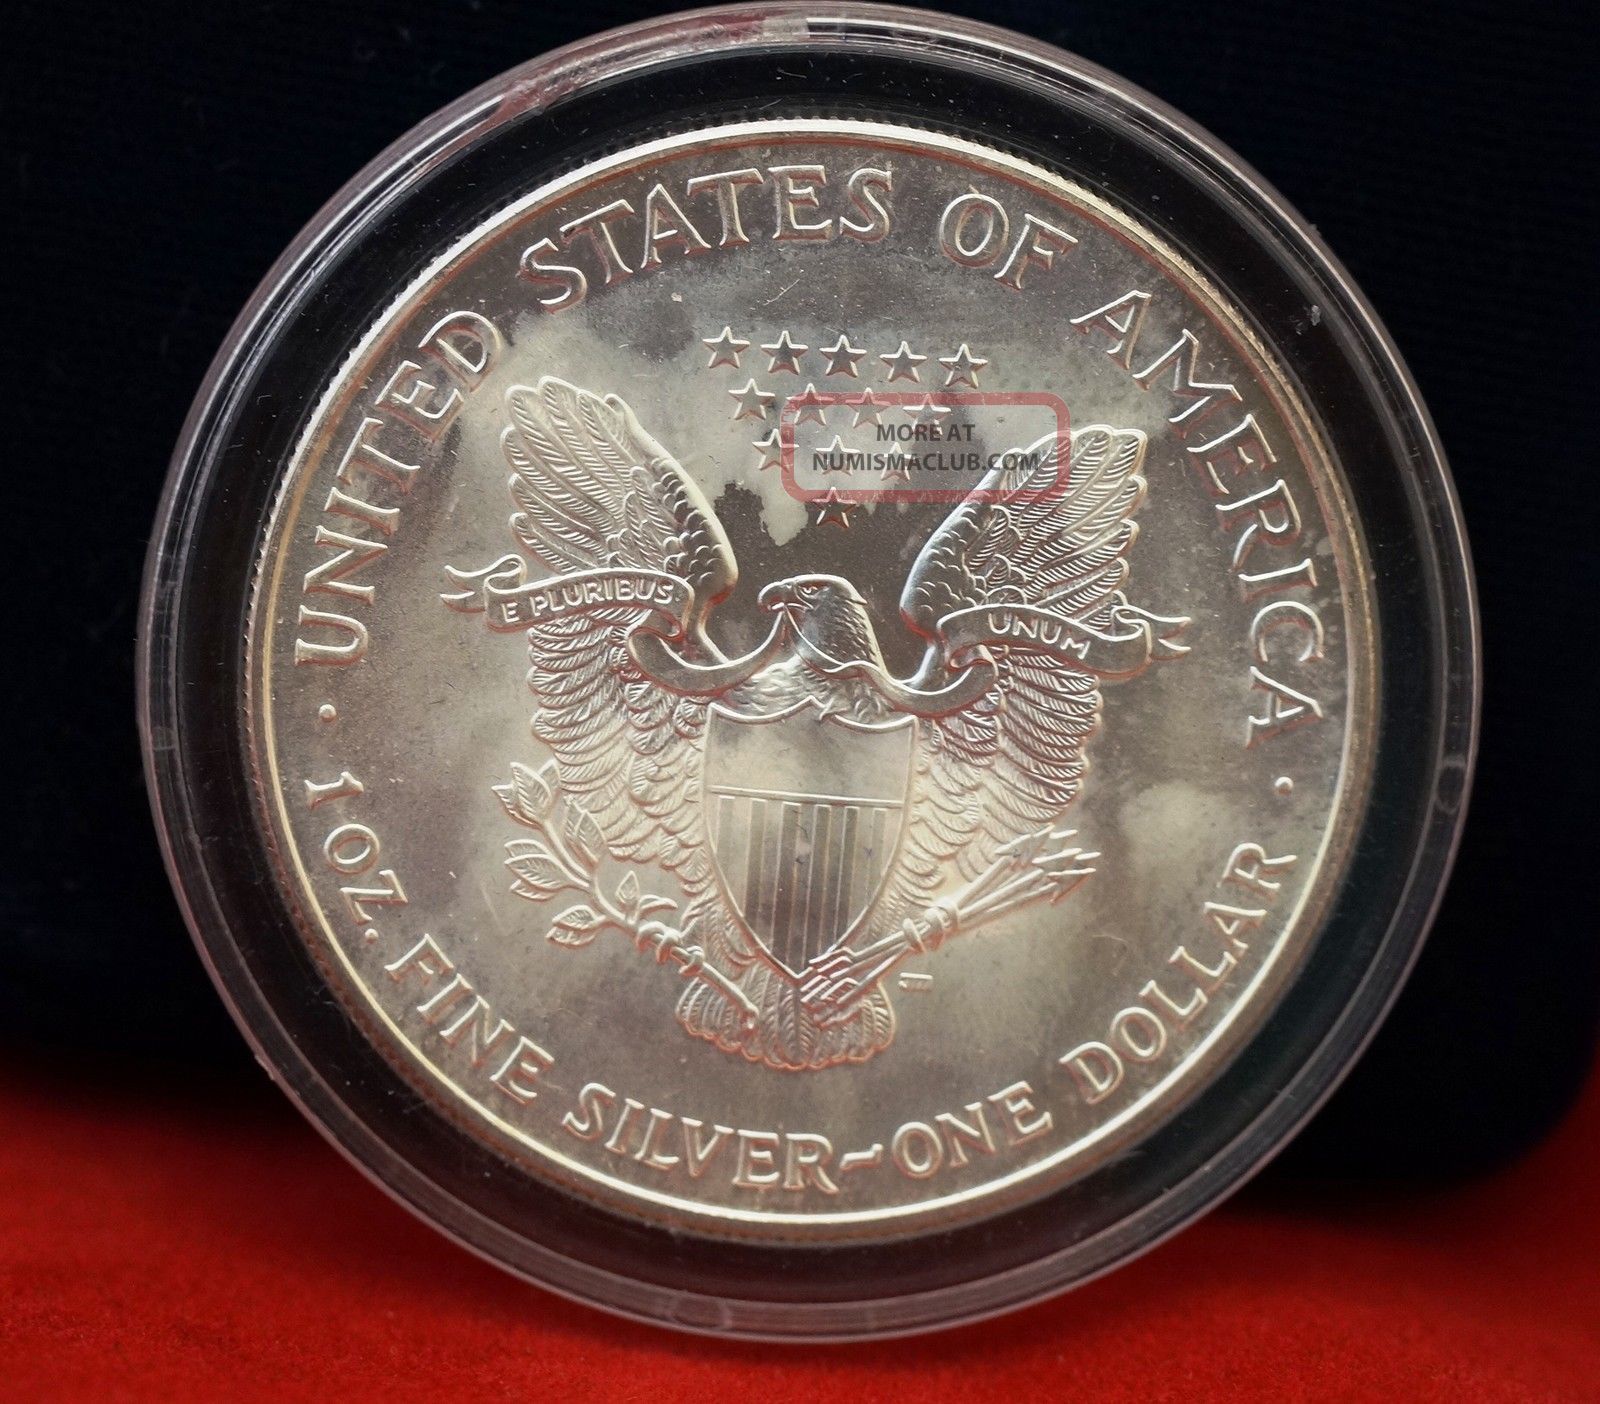 1999 American Eagle Lady Liberty Full Color. 999 Proof Silver Dollar